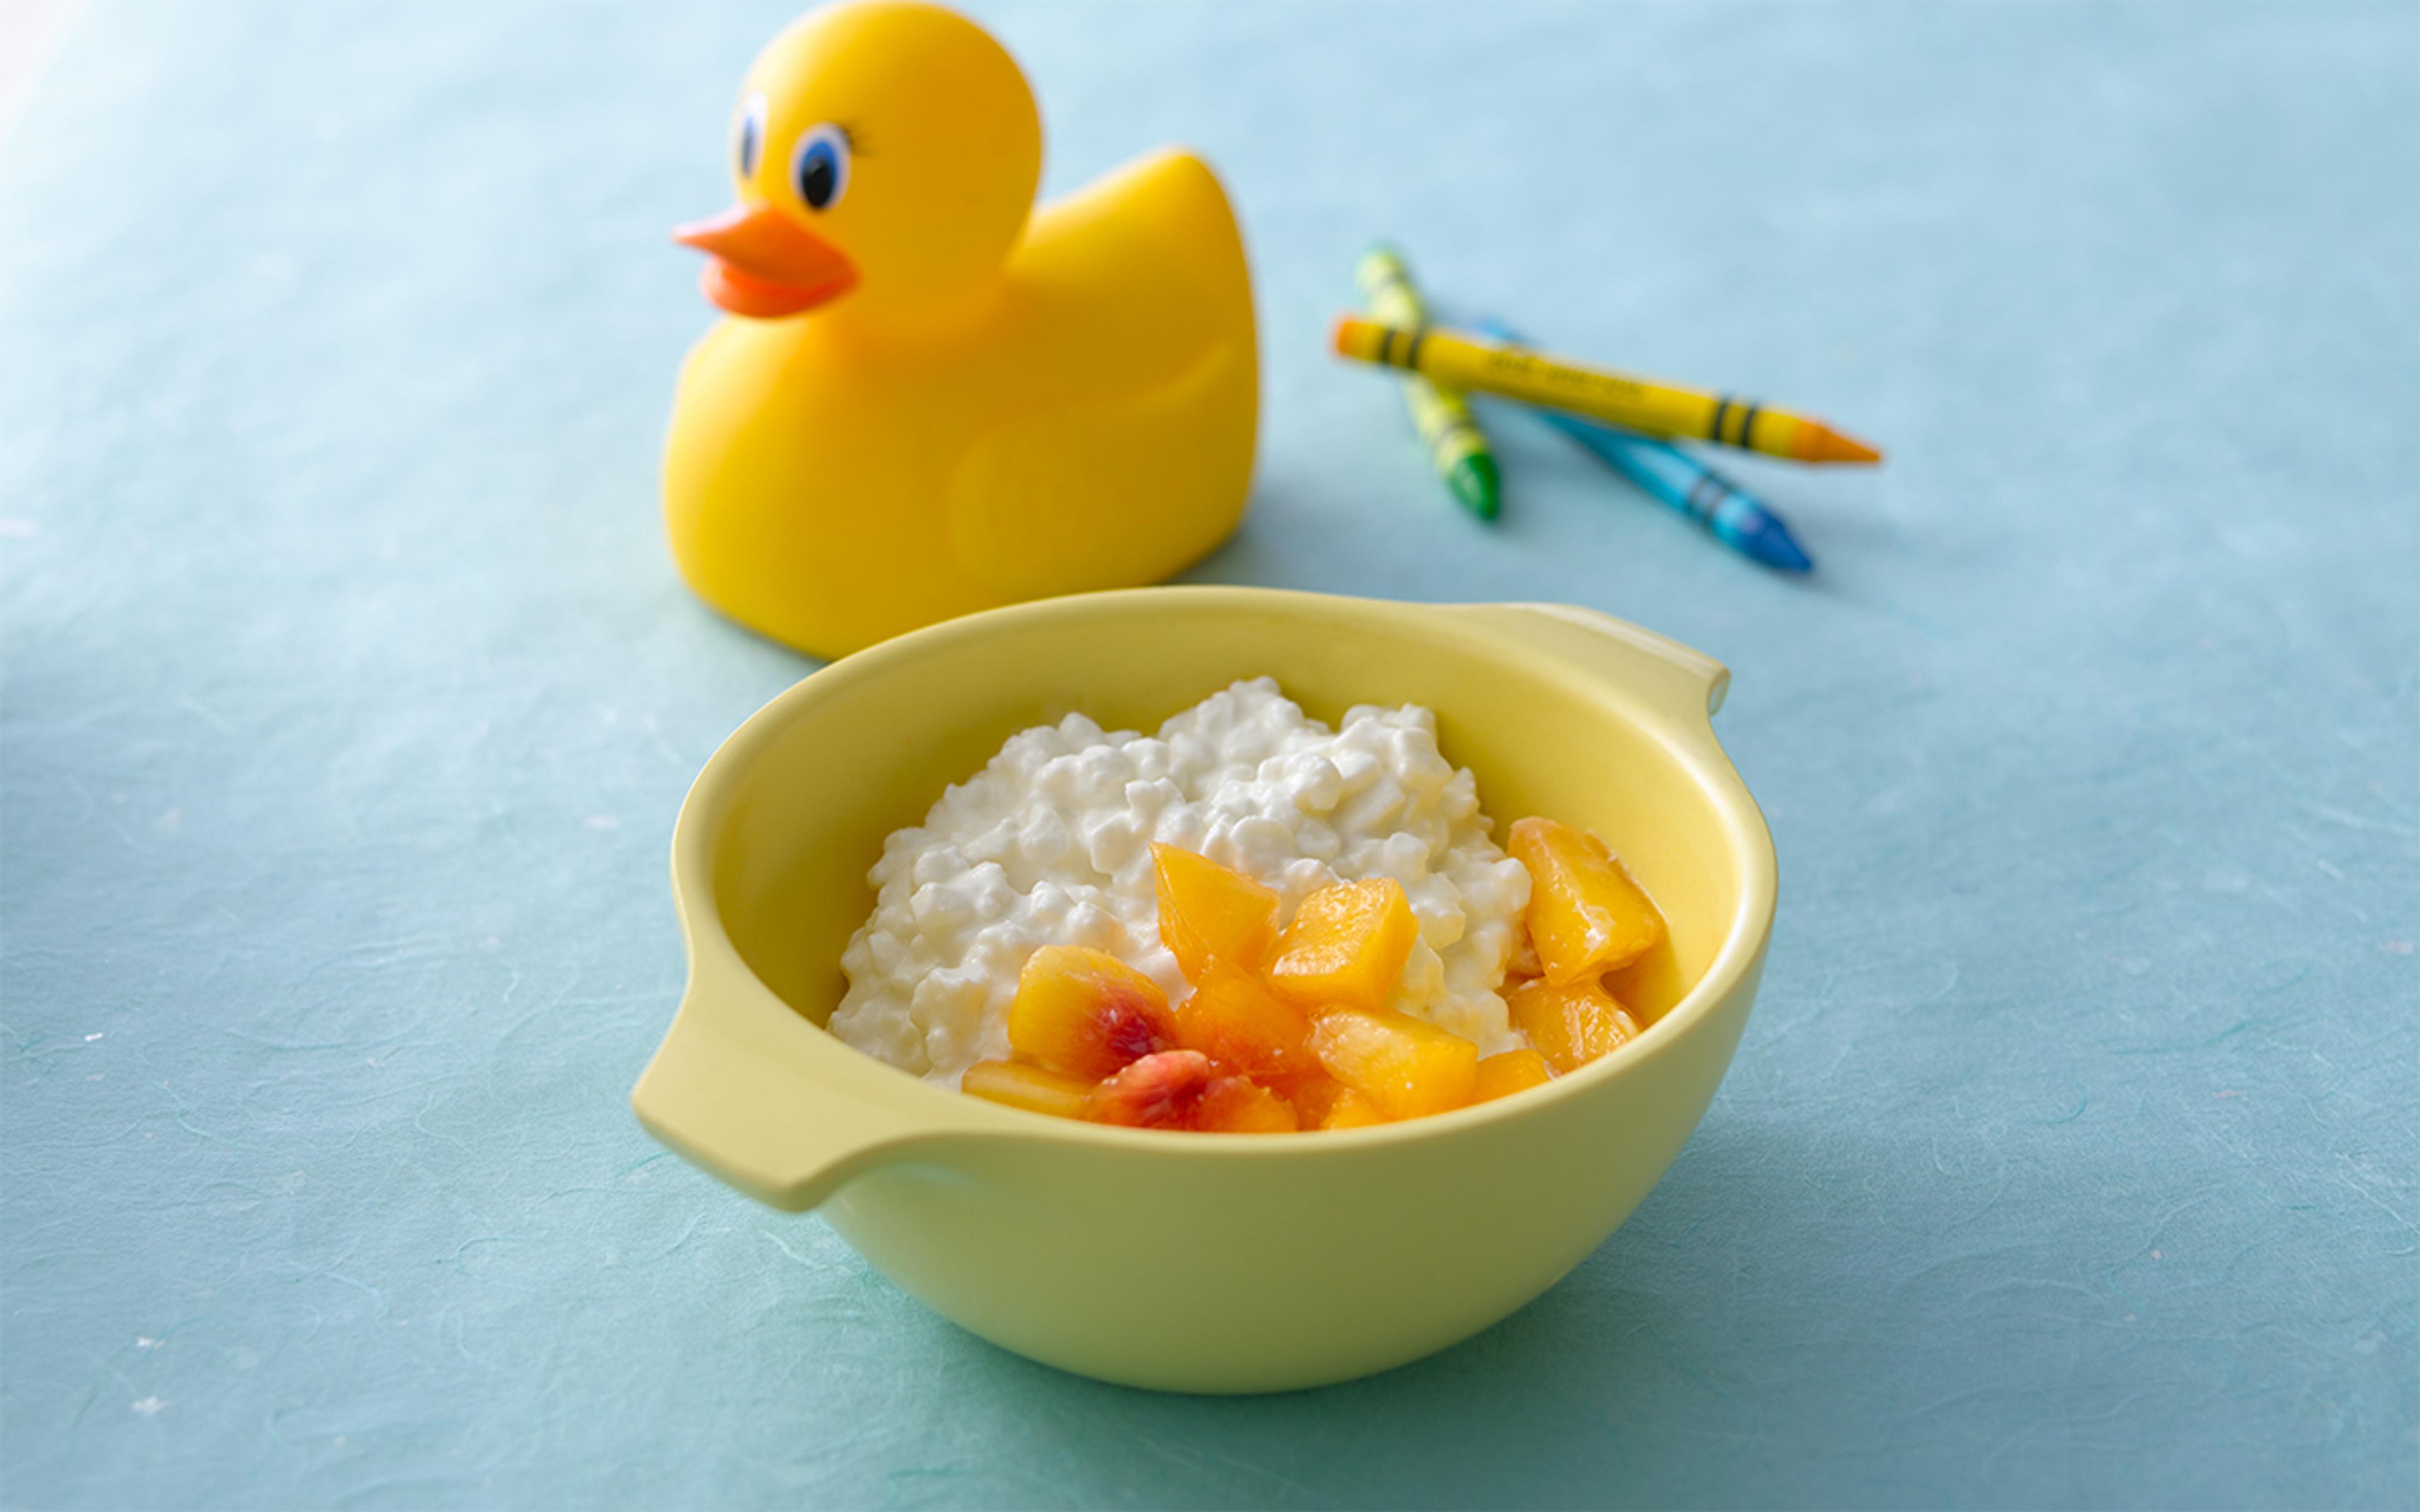 A cup of cottage cheese and cut peaches with a rubber ducky and some crayons in the background.